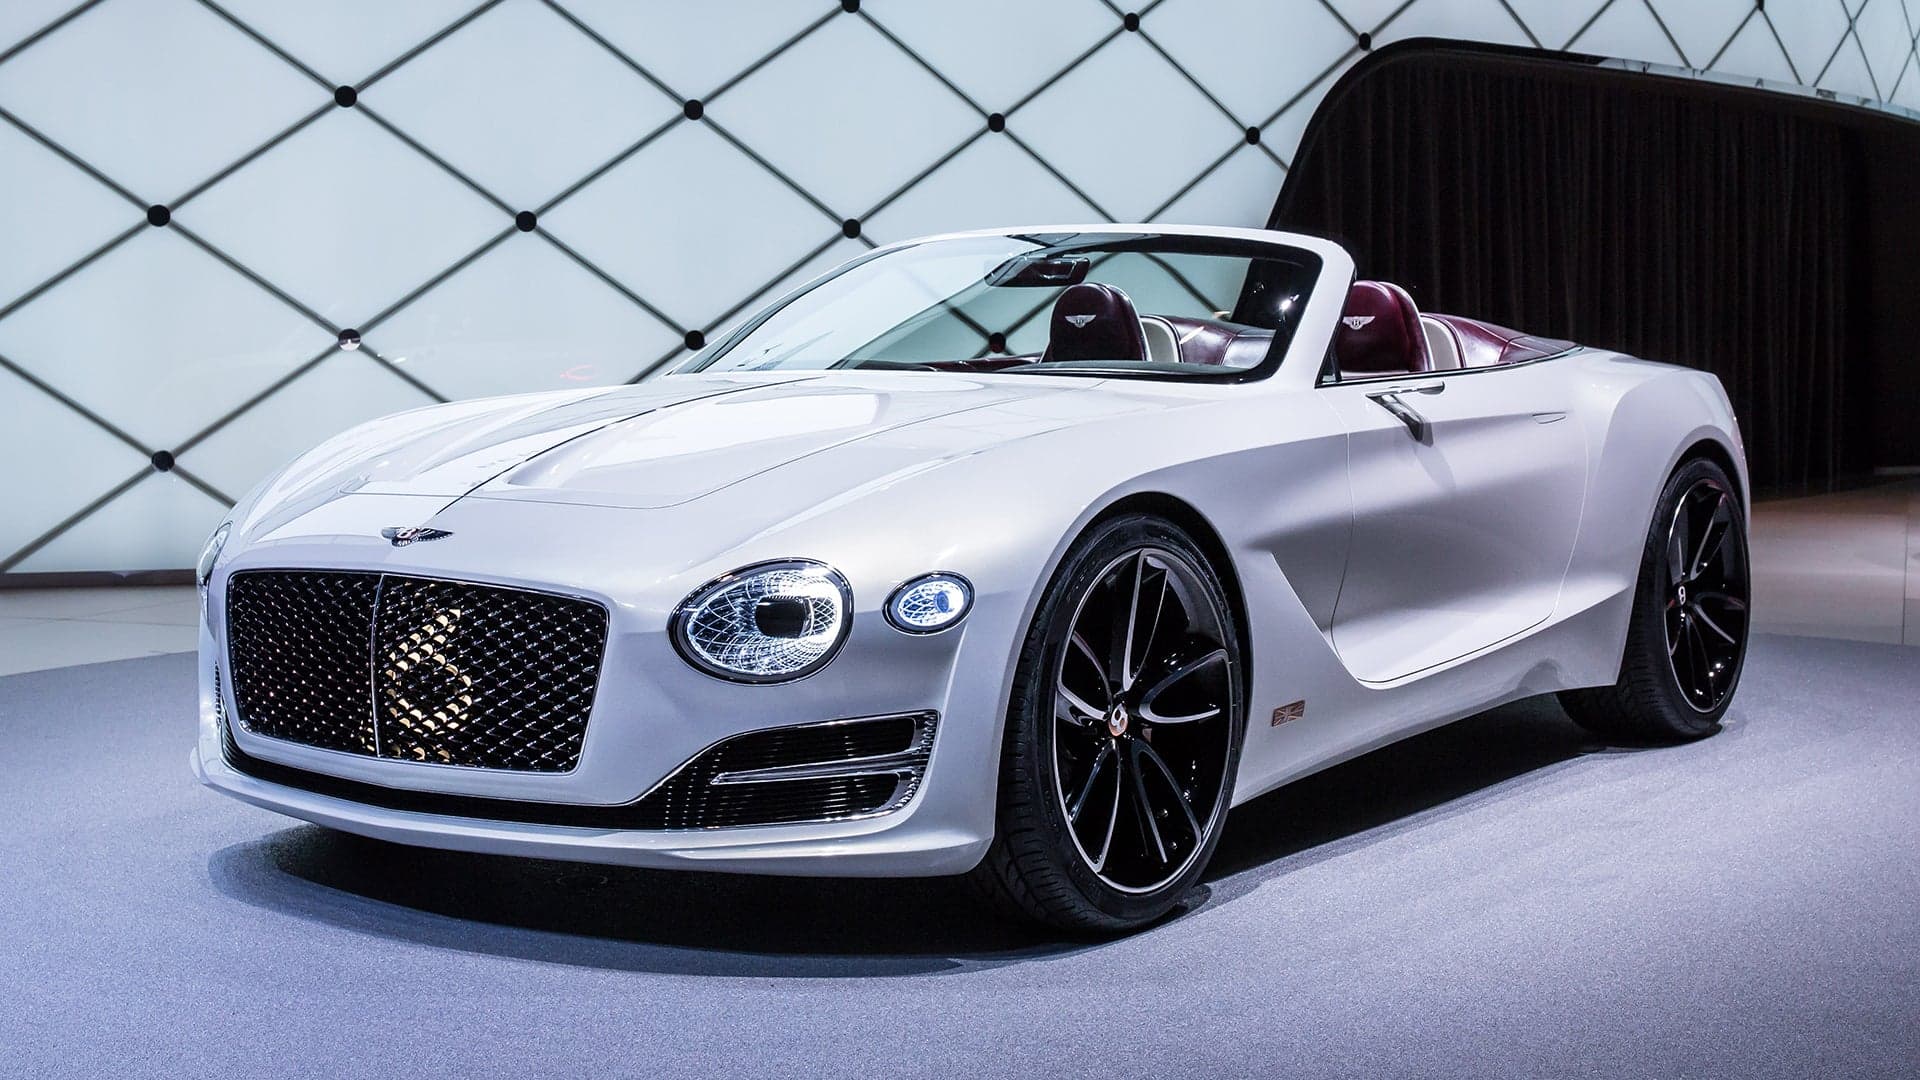 Bentley Speed Six Could Be Canned If Porsche, Lamborghini, or Audi Complain